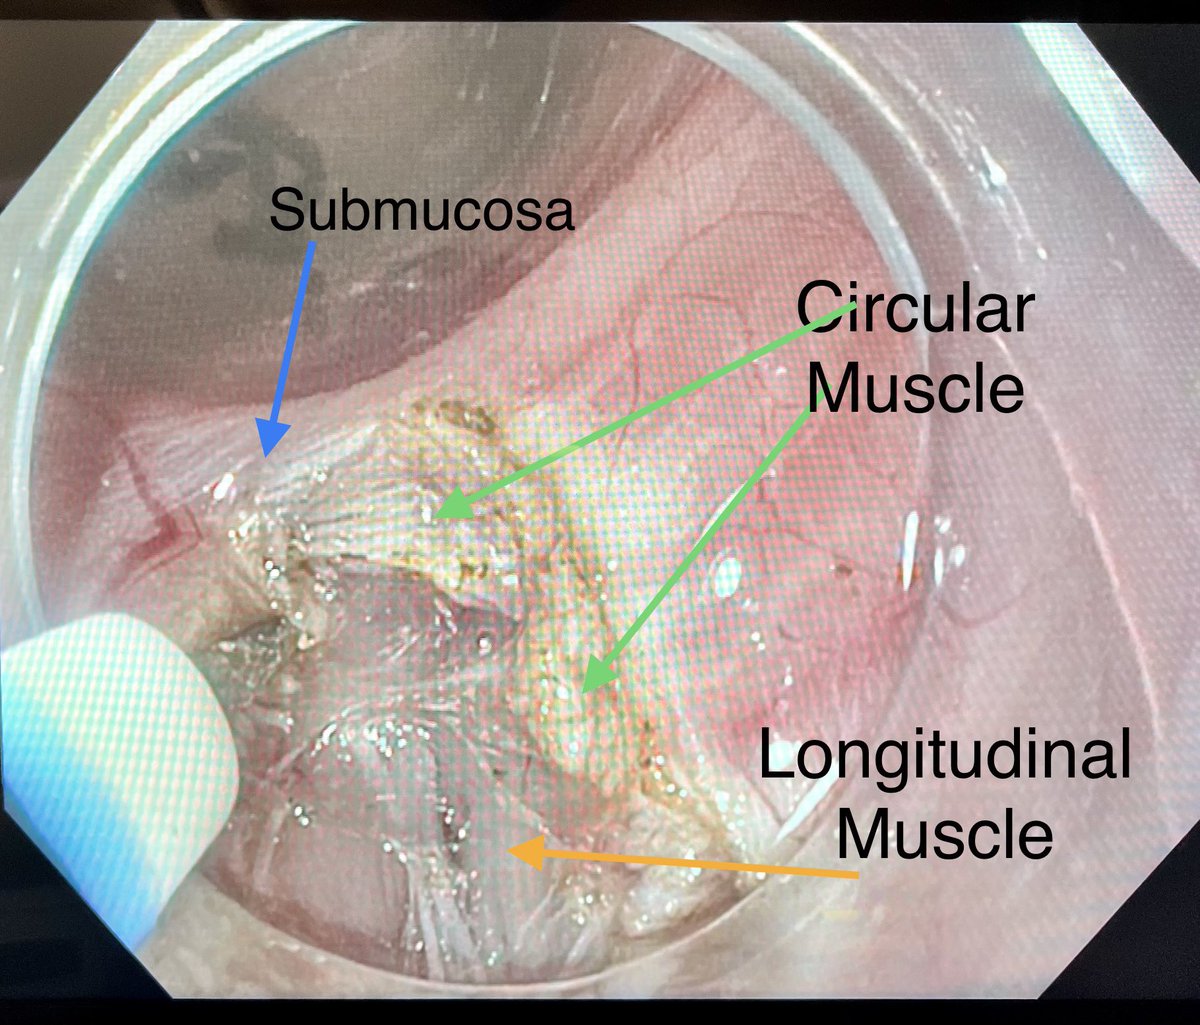 POEM - per oral endoscopic myotomy.

View form in the submucosa tunnel:
Good to understand the anatomy.

#Endoscopy #Achalasia 
#GITwitter 
#MedEd #Gifellows